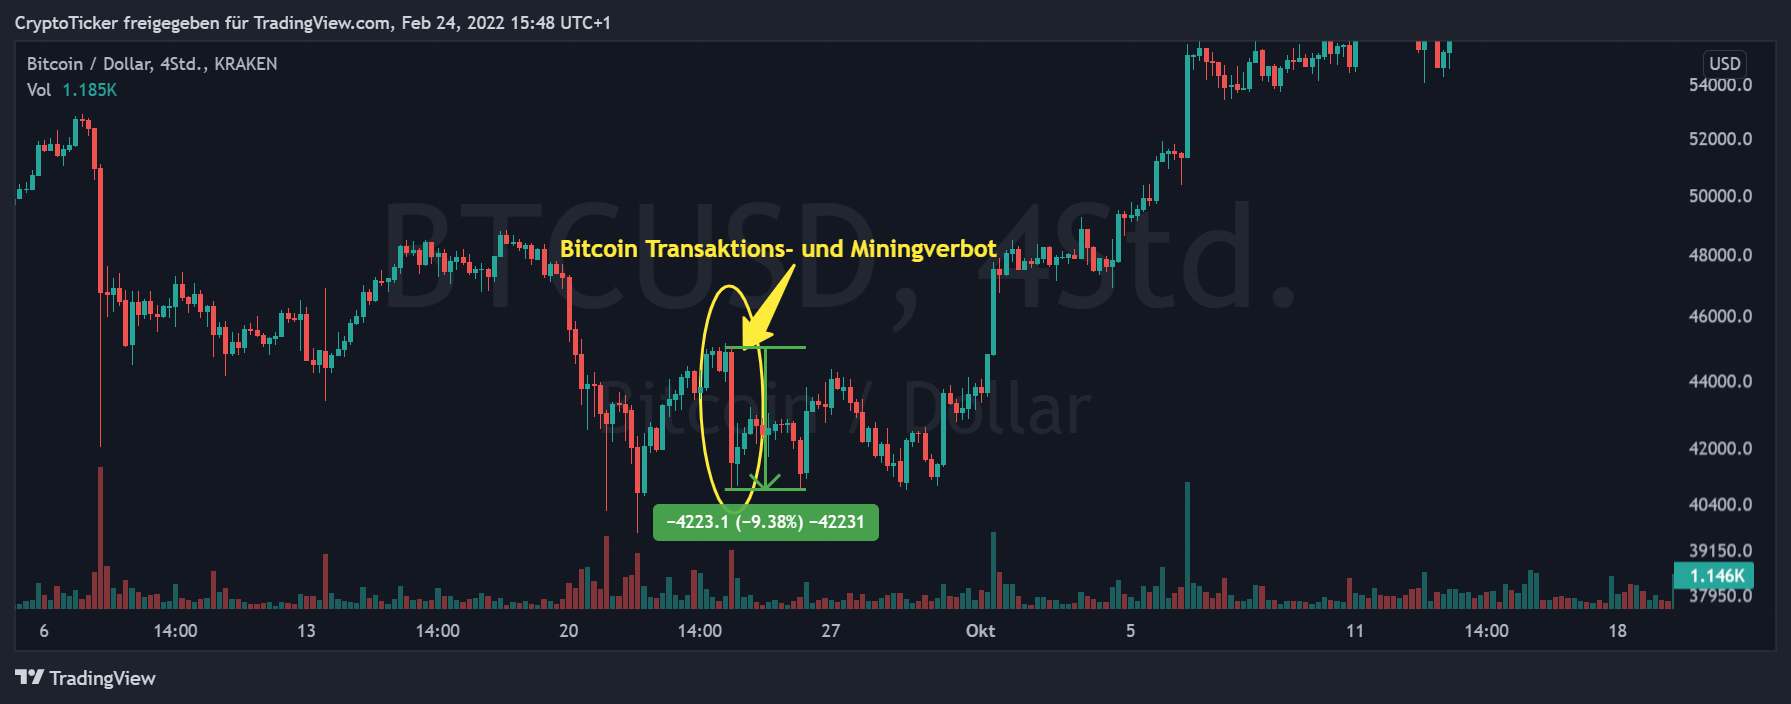 BTC/USD 4-hours chart showing how BTC dropped during mining bans